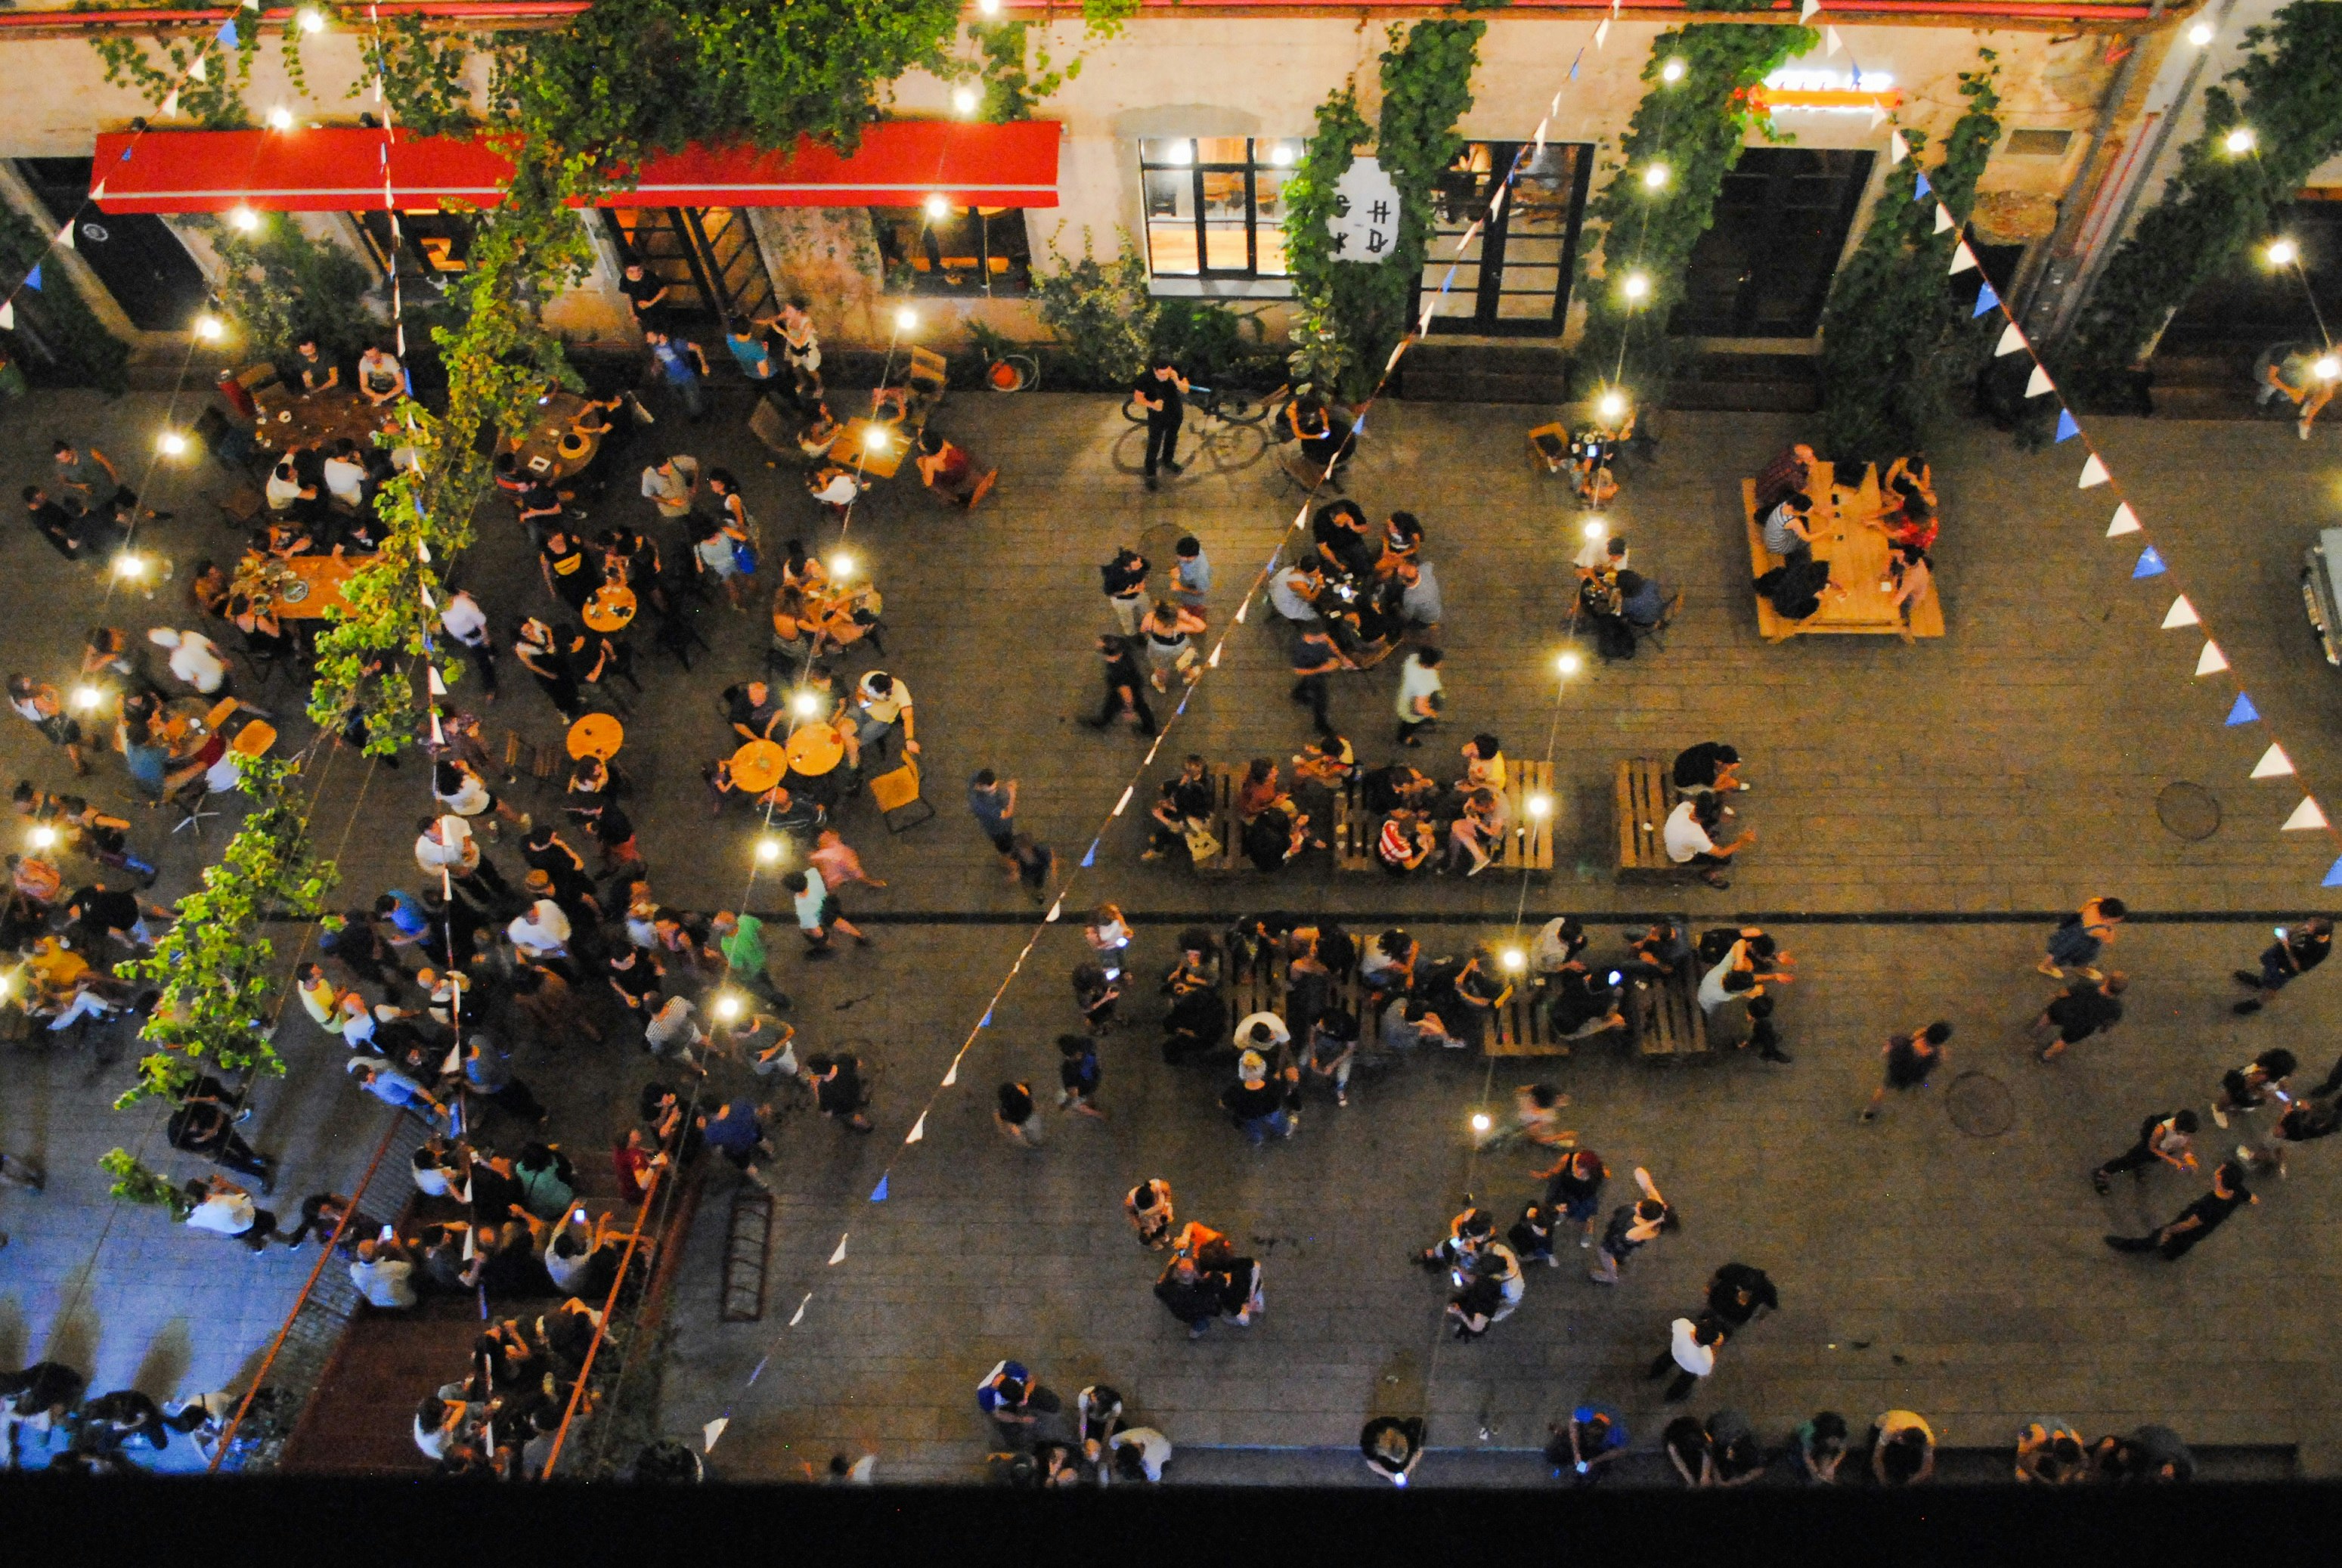 A shot downwards into a busy courtyard, where people are sitting at tables and standing in groups talking.